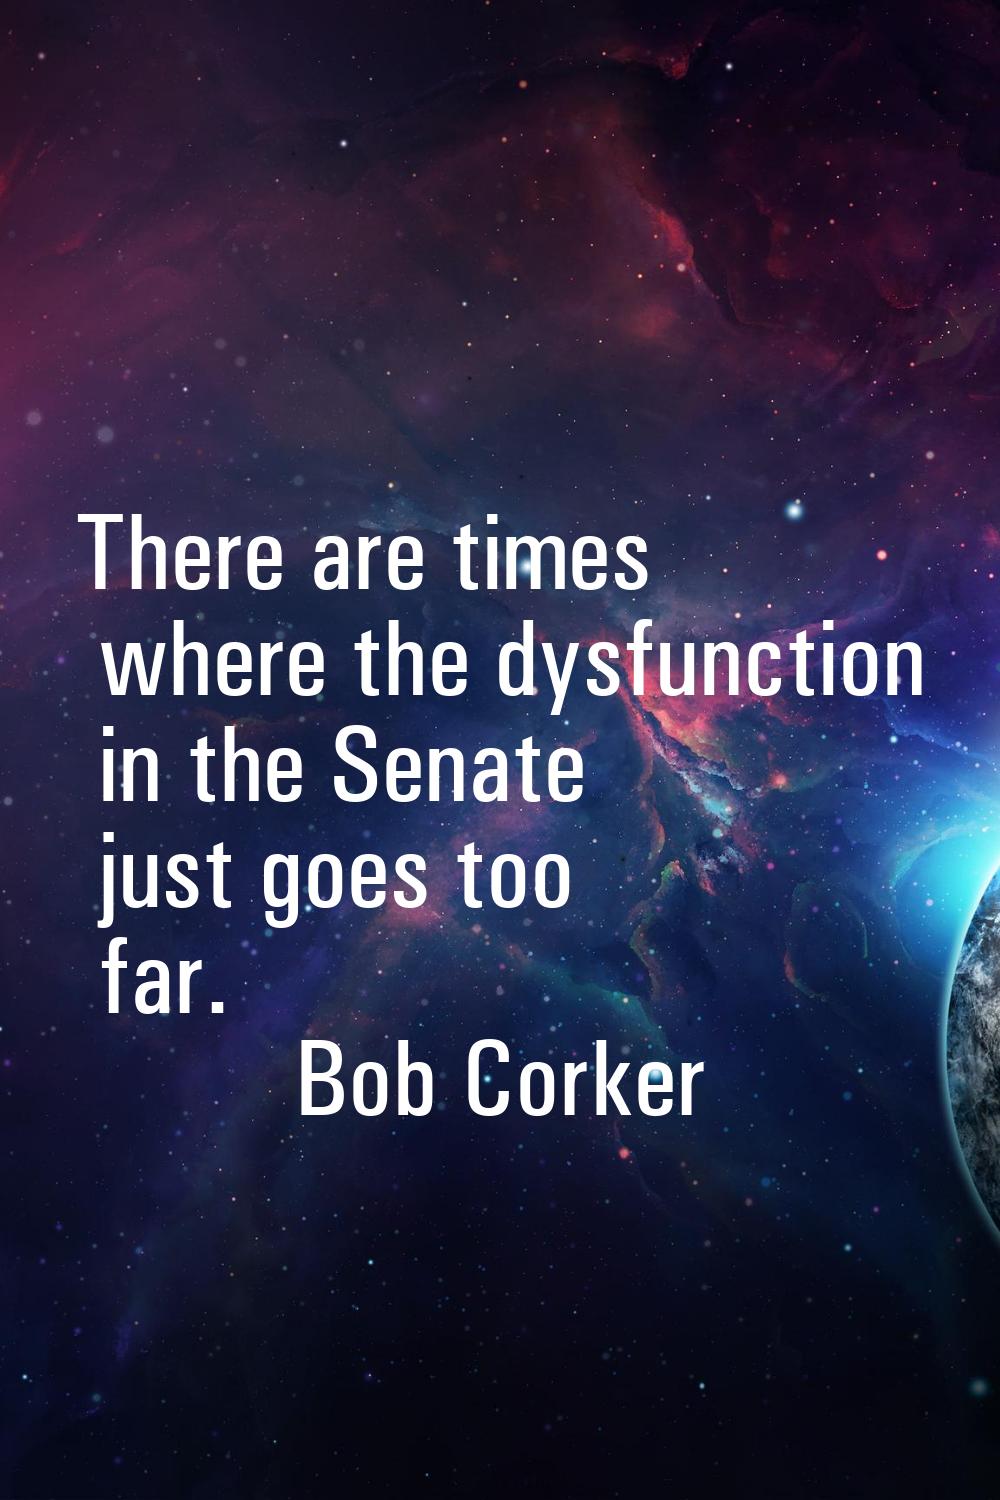 There are times where the dysfunction in the Senate just goes too far.